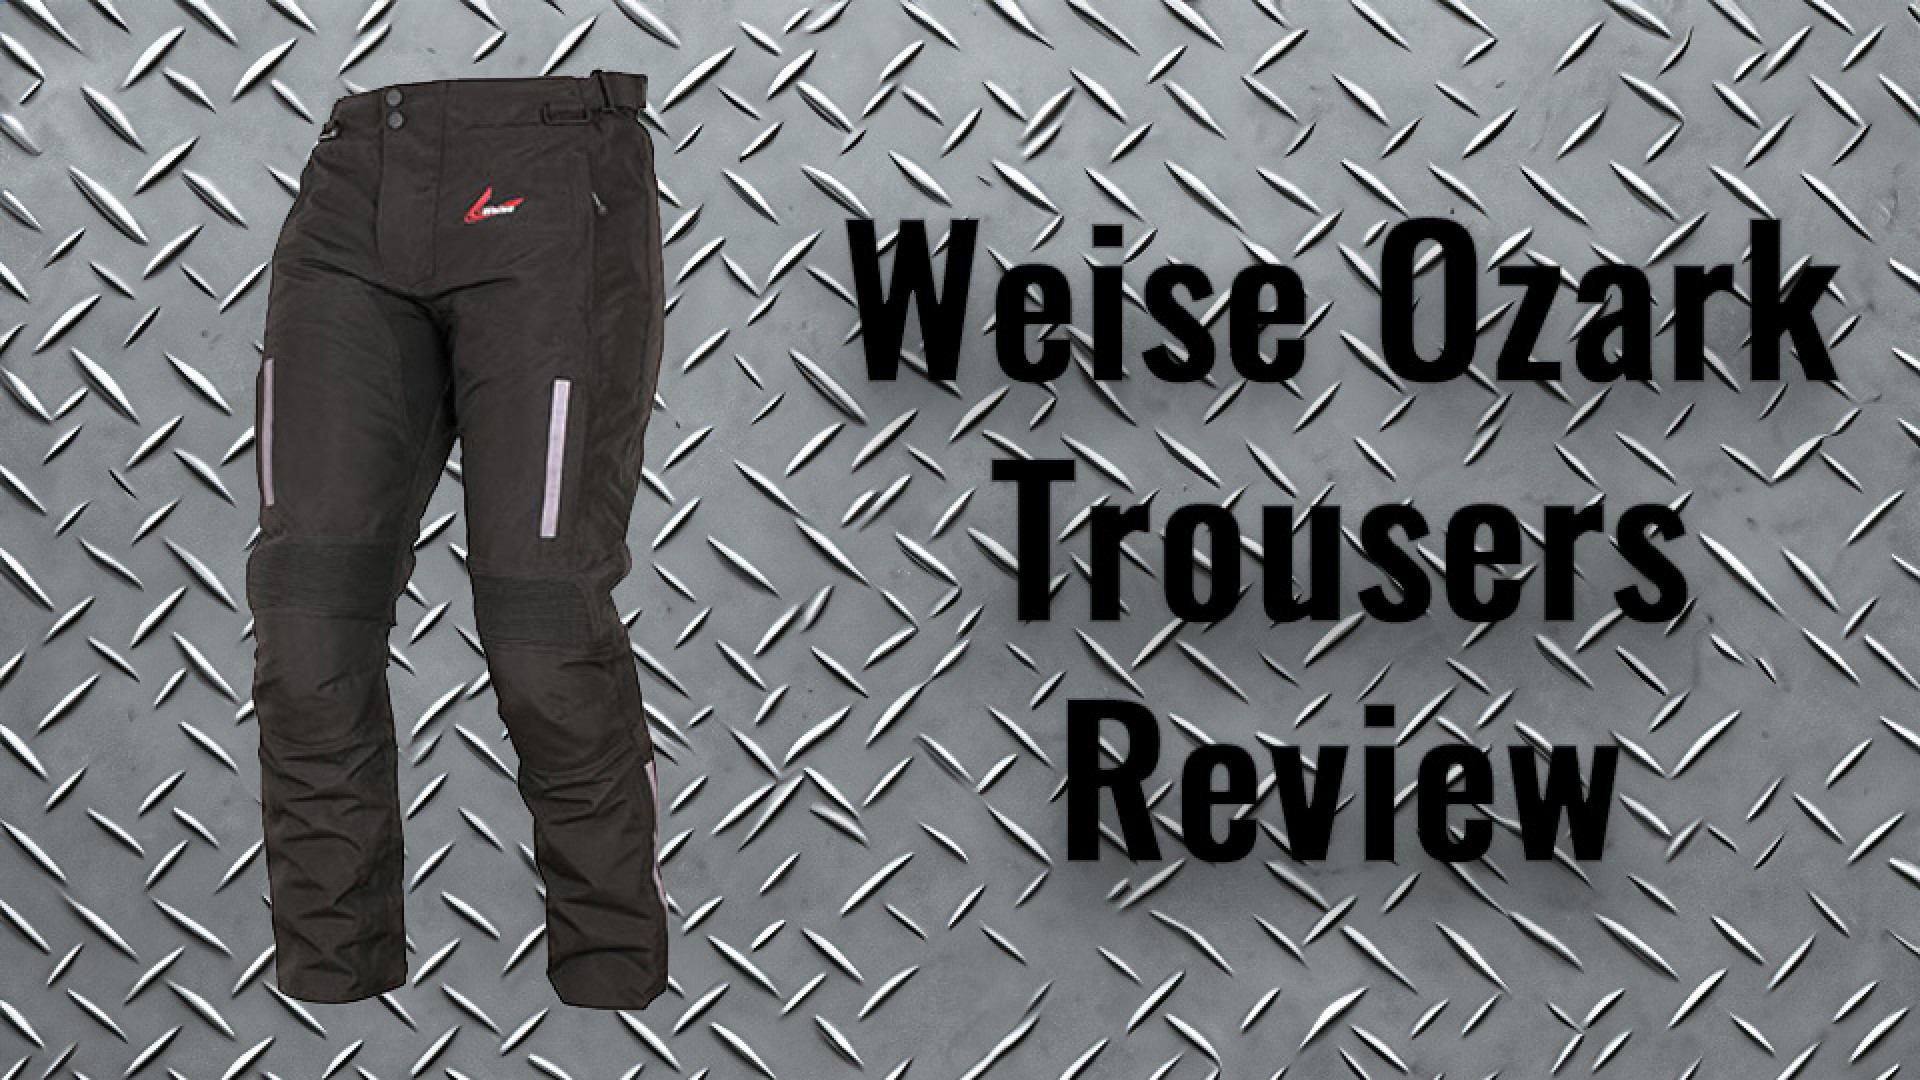 https://www.raceleathers.co.uk/image/cache/catalog/Blog%20Images/Weise%20Ozark%20Trousers%20Review-1920x1080.jpg